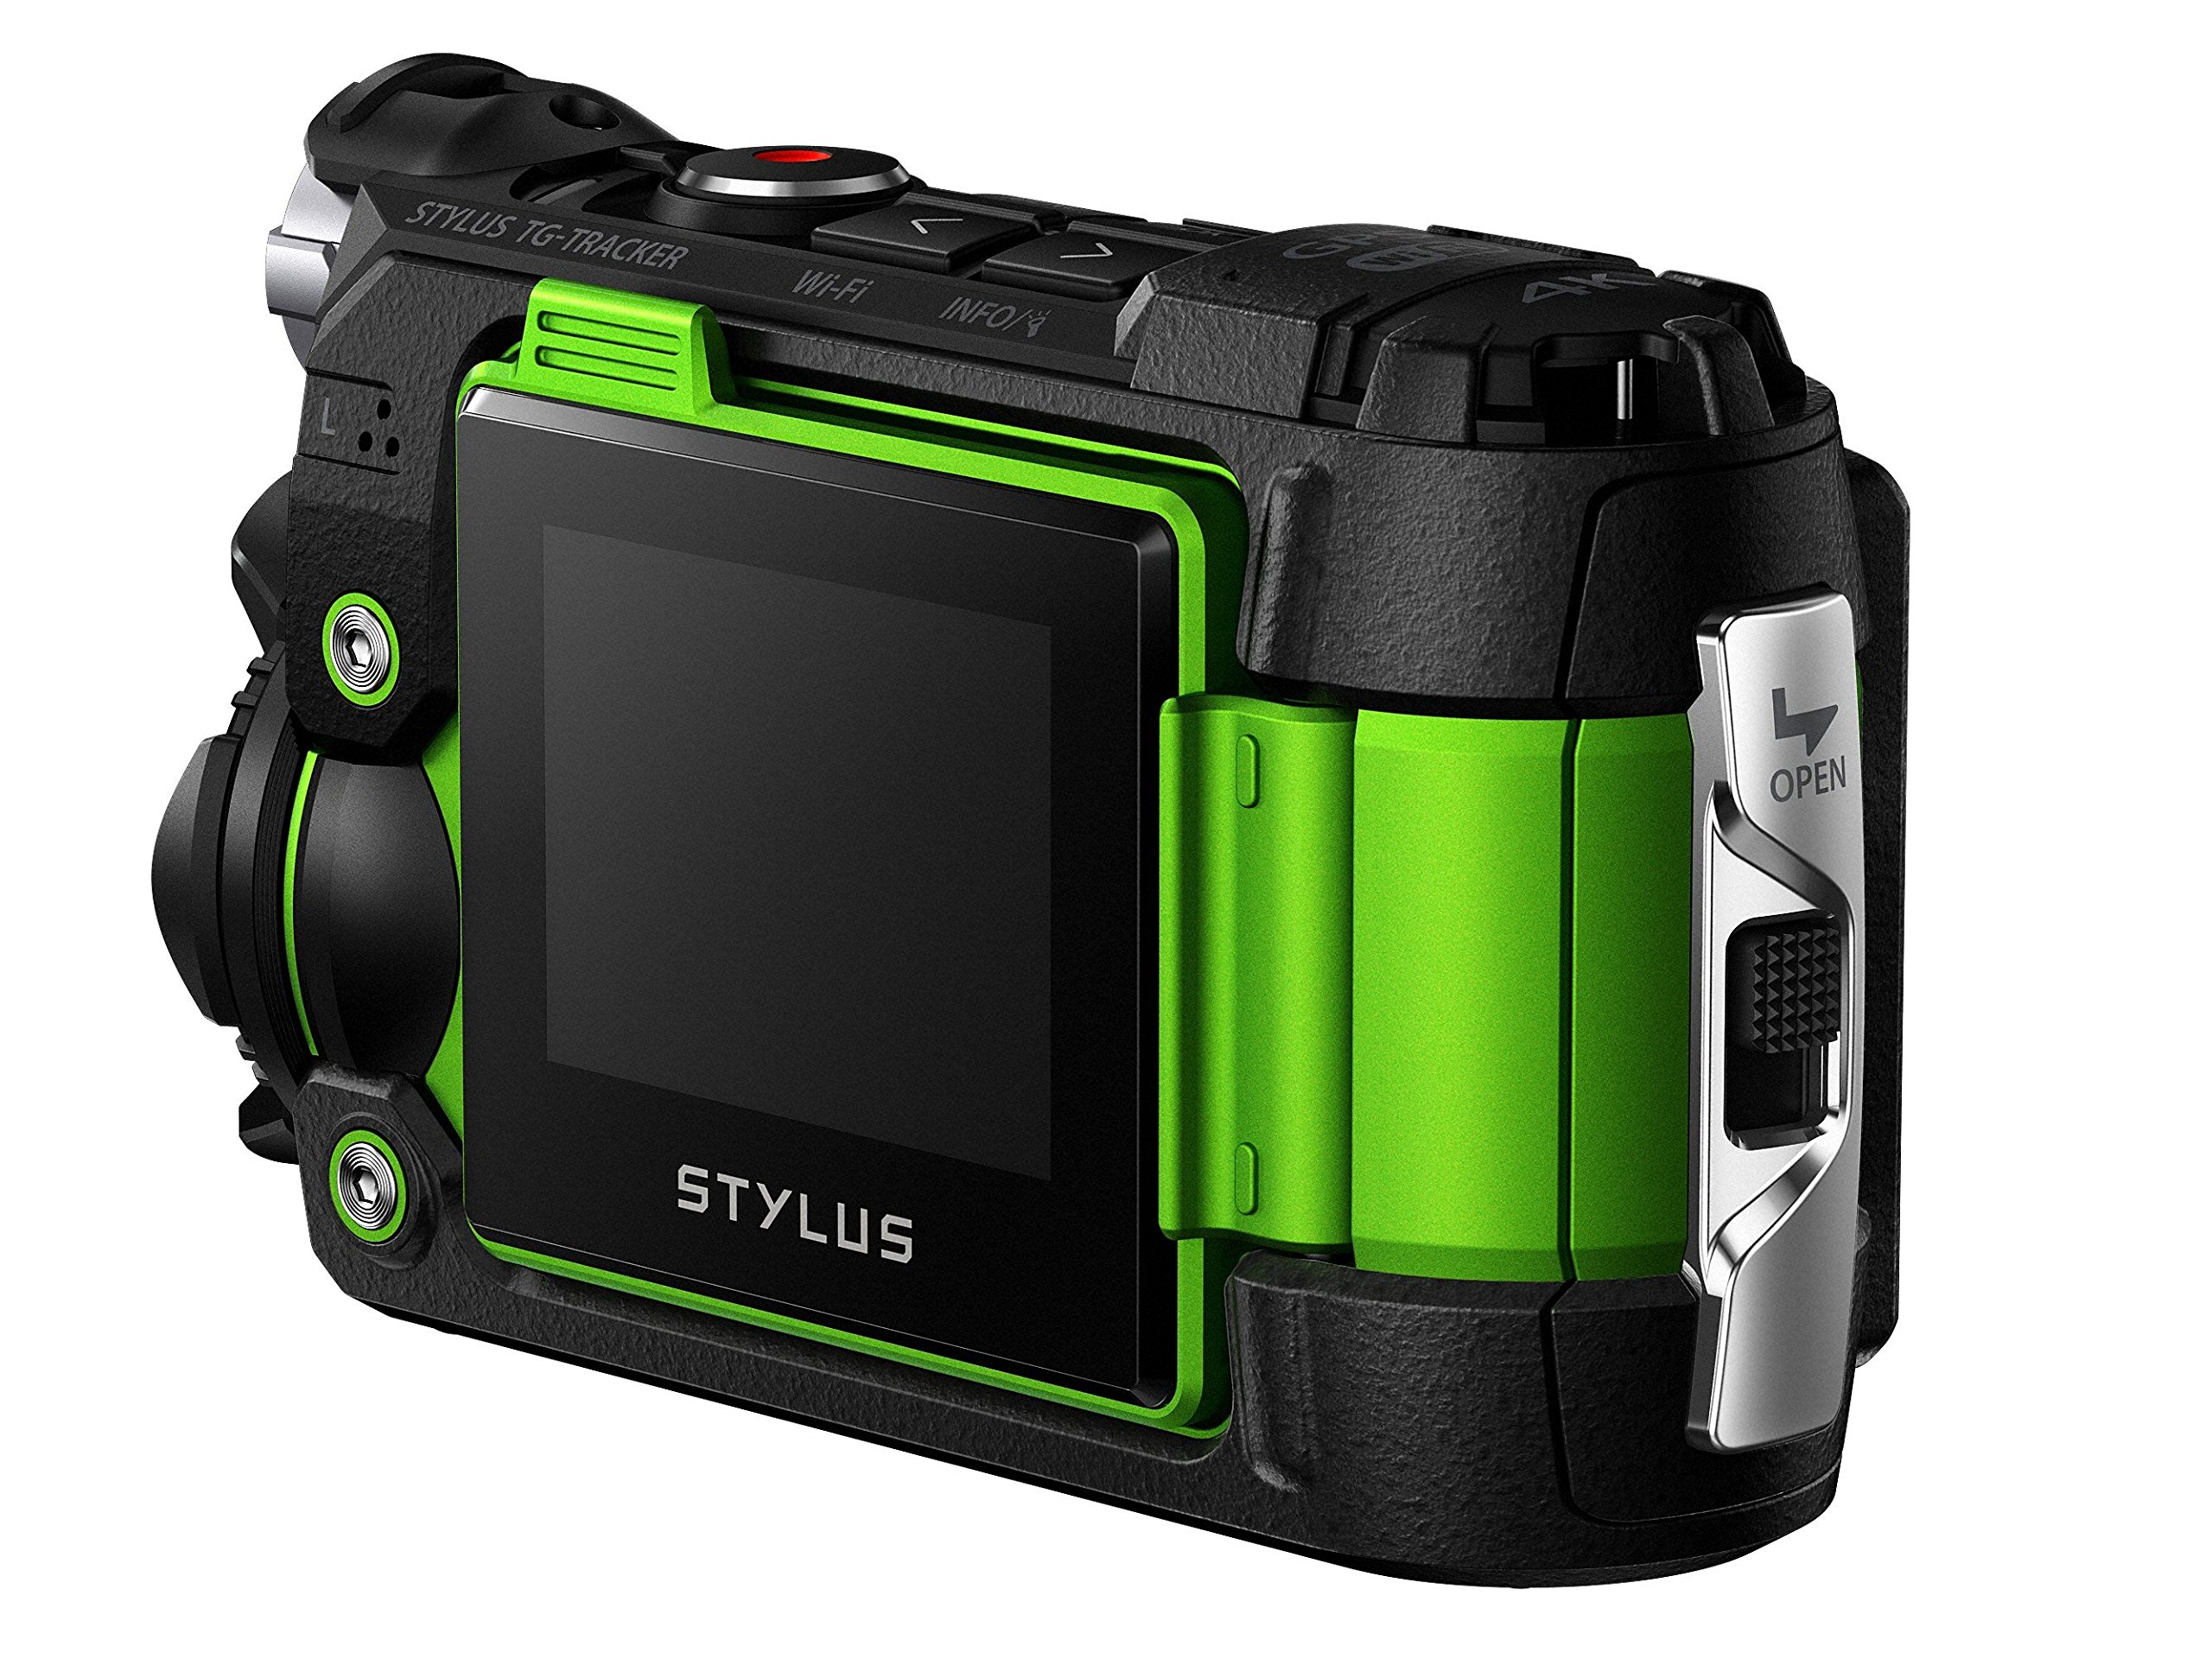 Olympus TG-Tracker with 1.5-Inch LCD (Green)